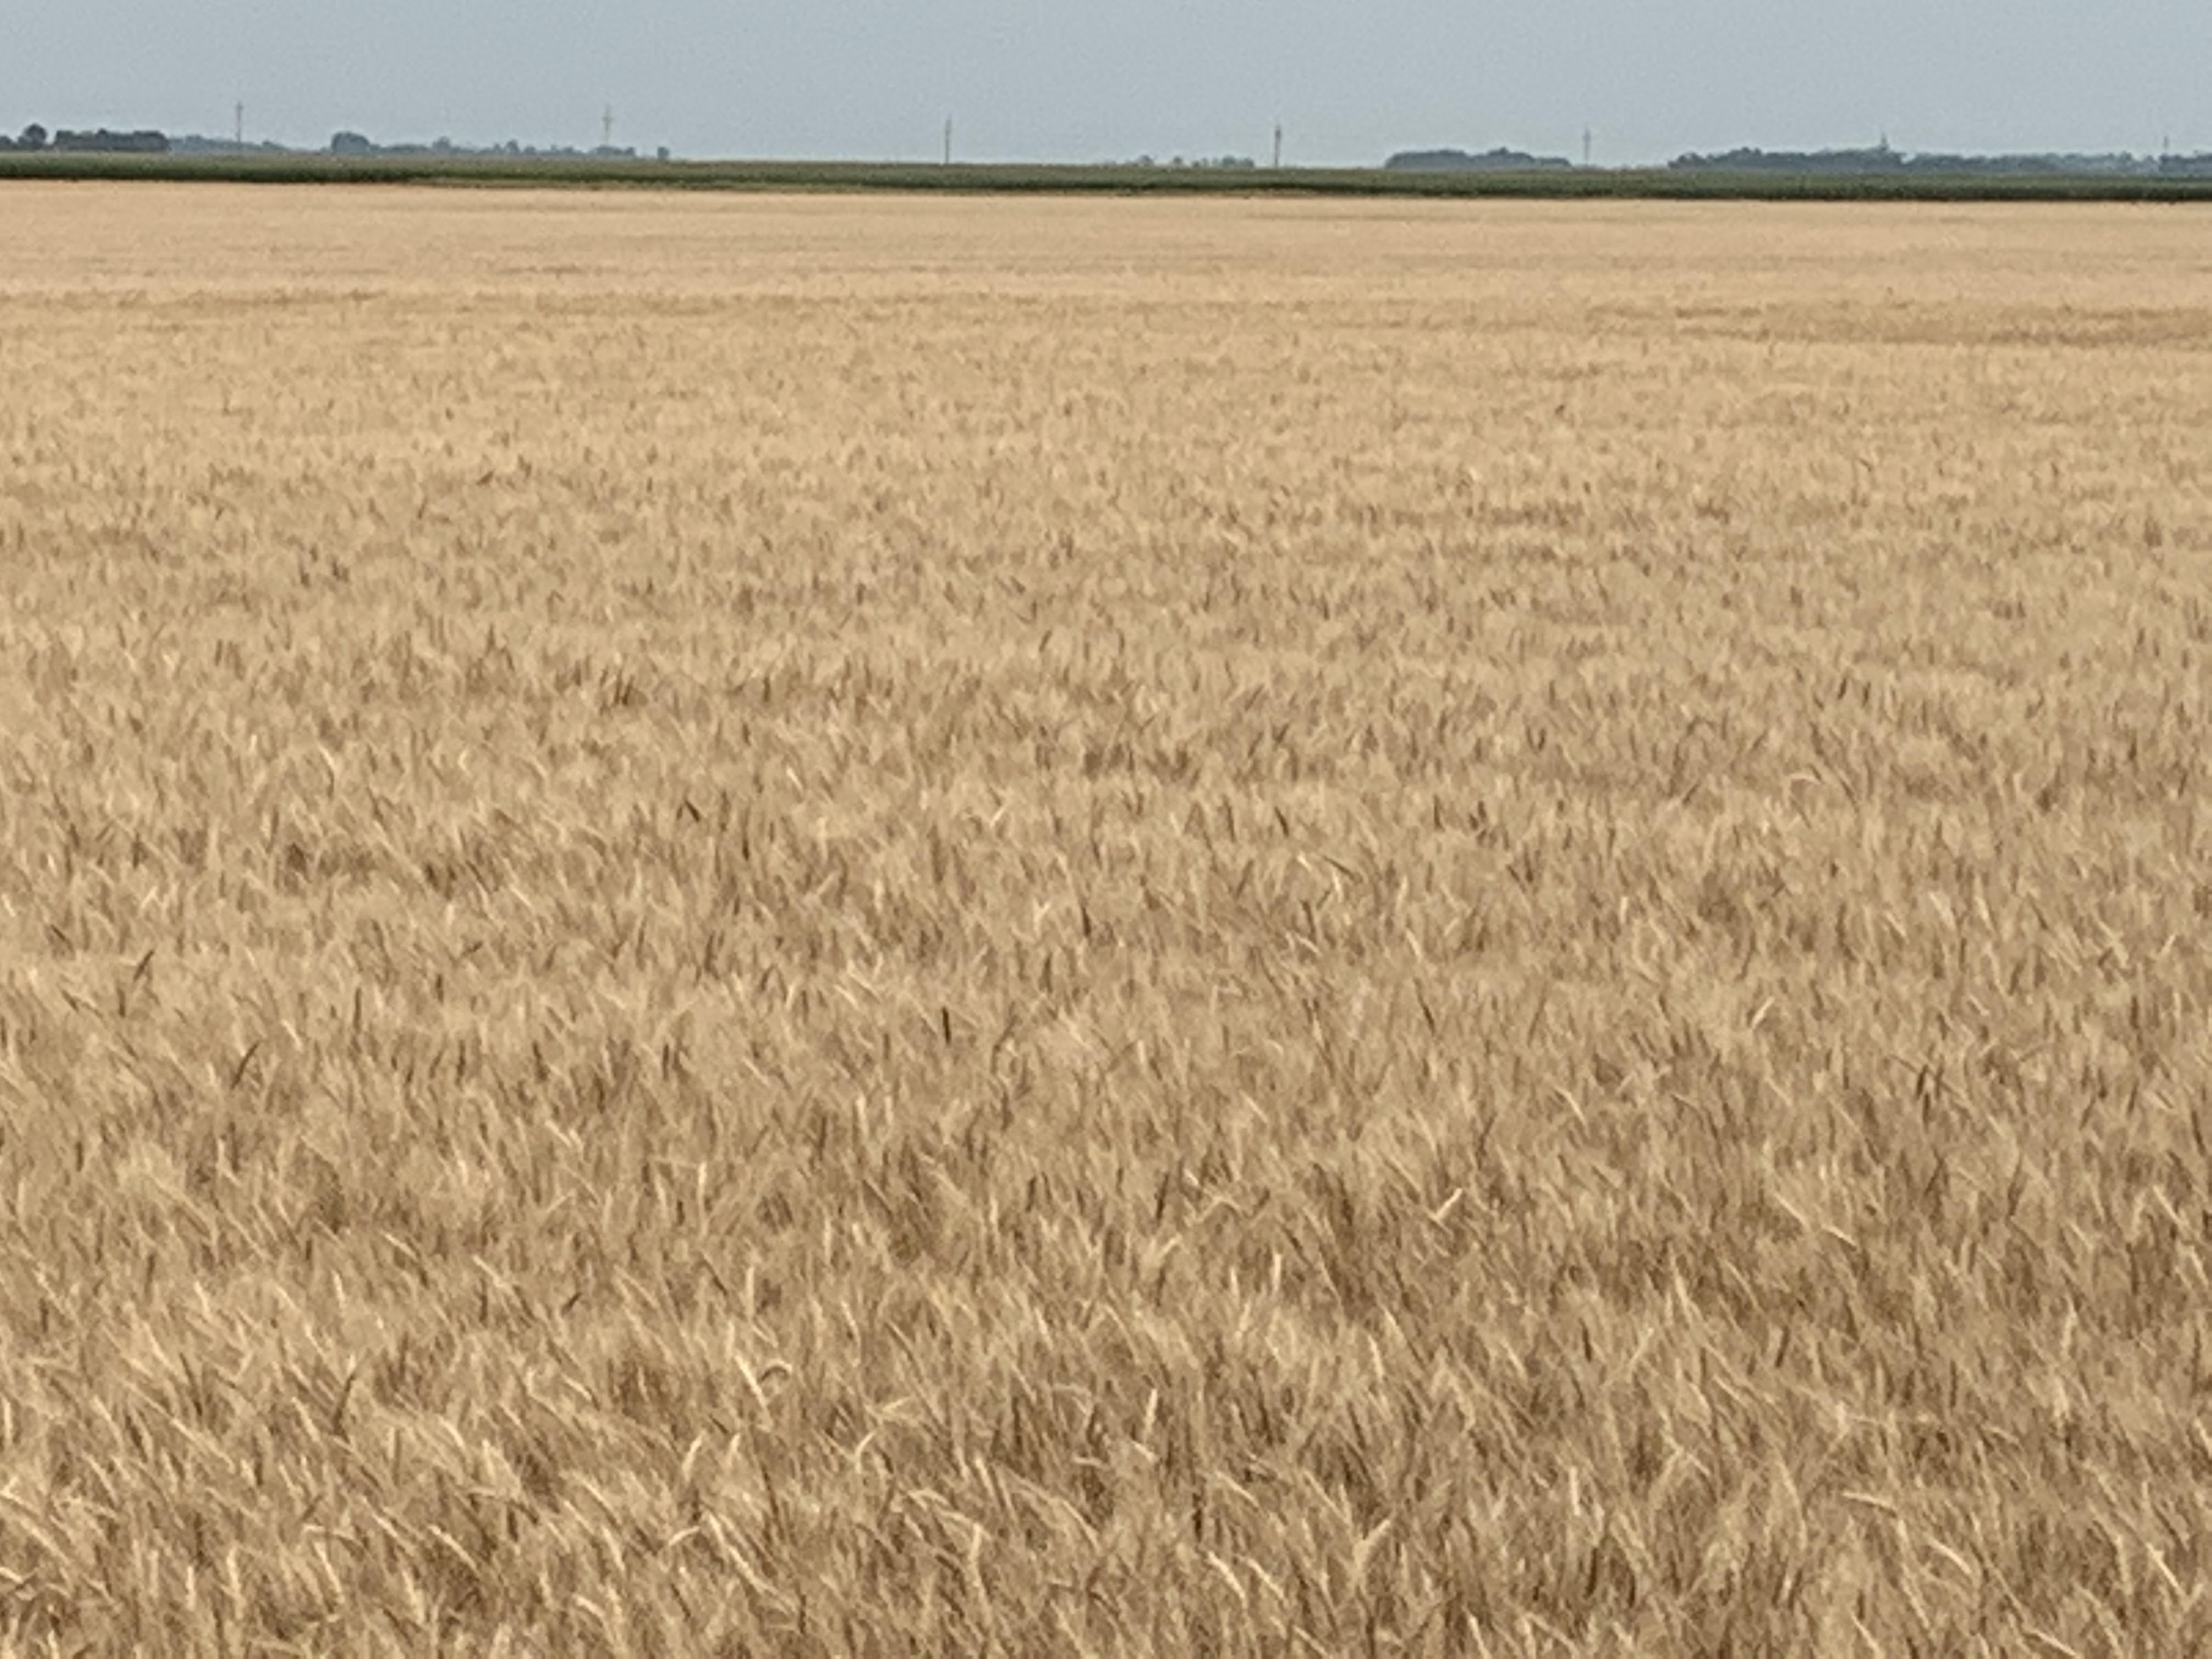 Mid-morning Ag News, January 5, 2022: Wheat market strong to start 2022